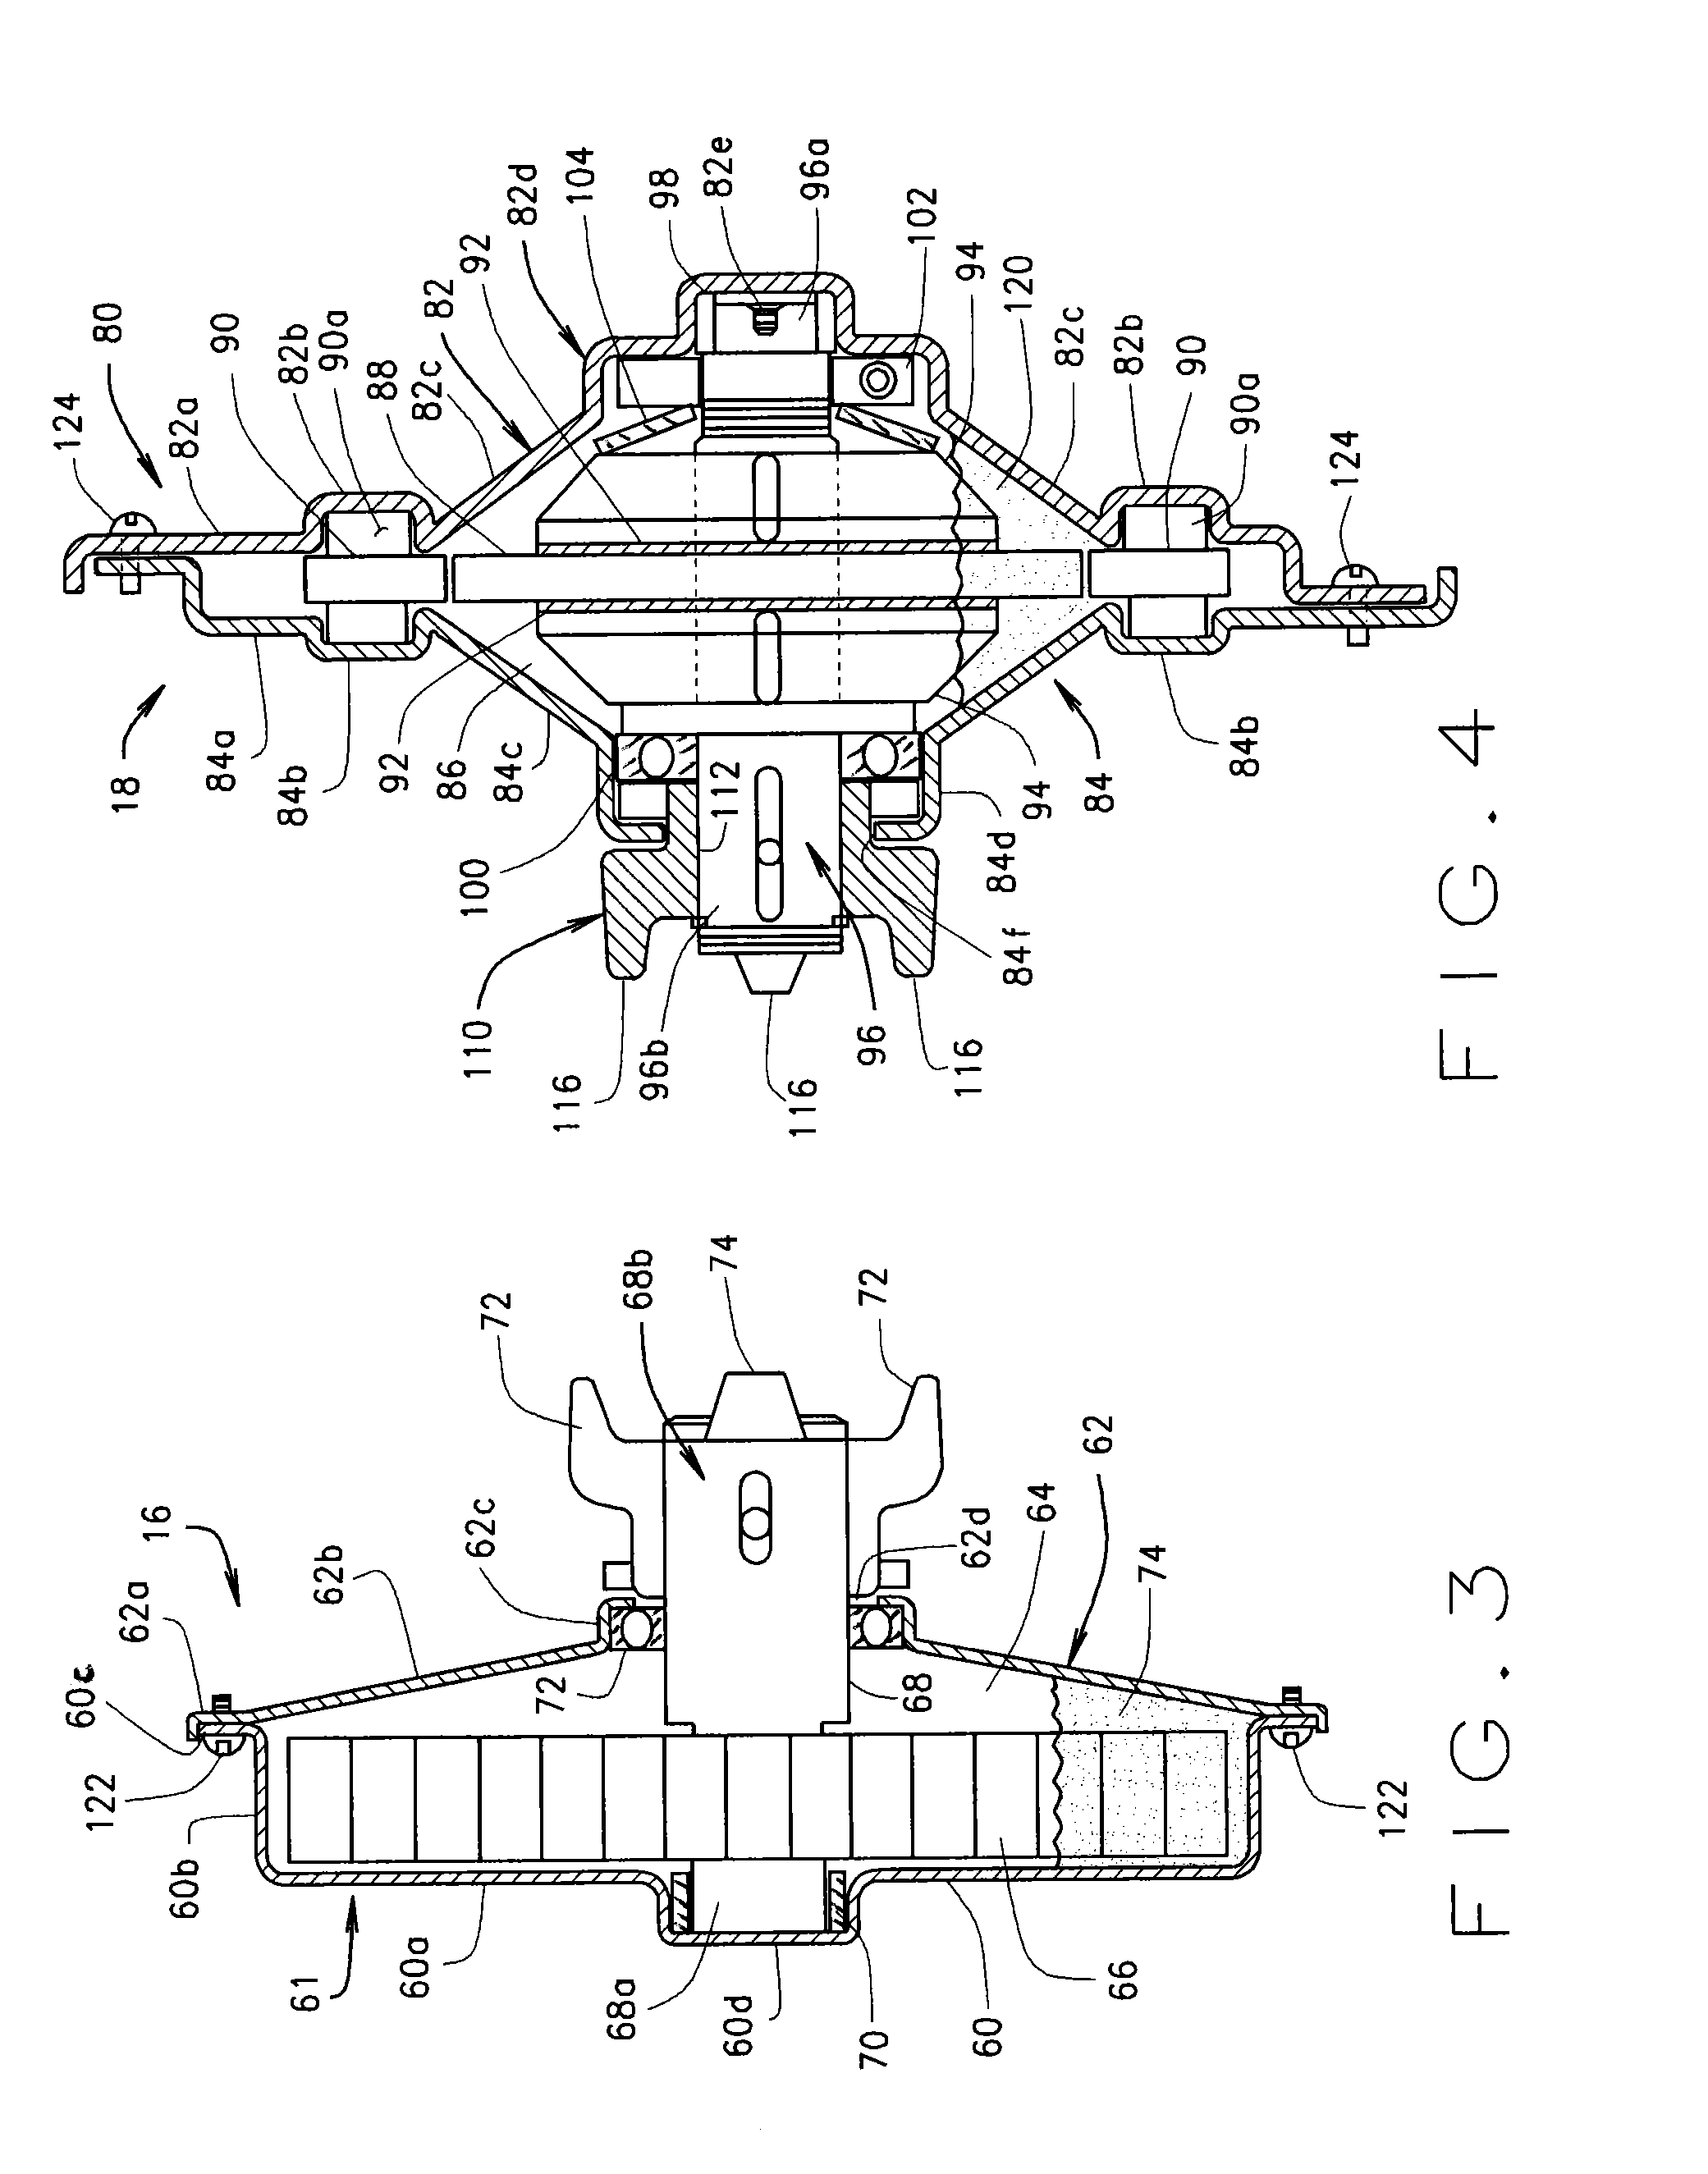 Retractable Fall Arrest WIth Component Assembly and Cantilevered Main Shaft